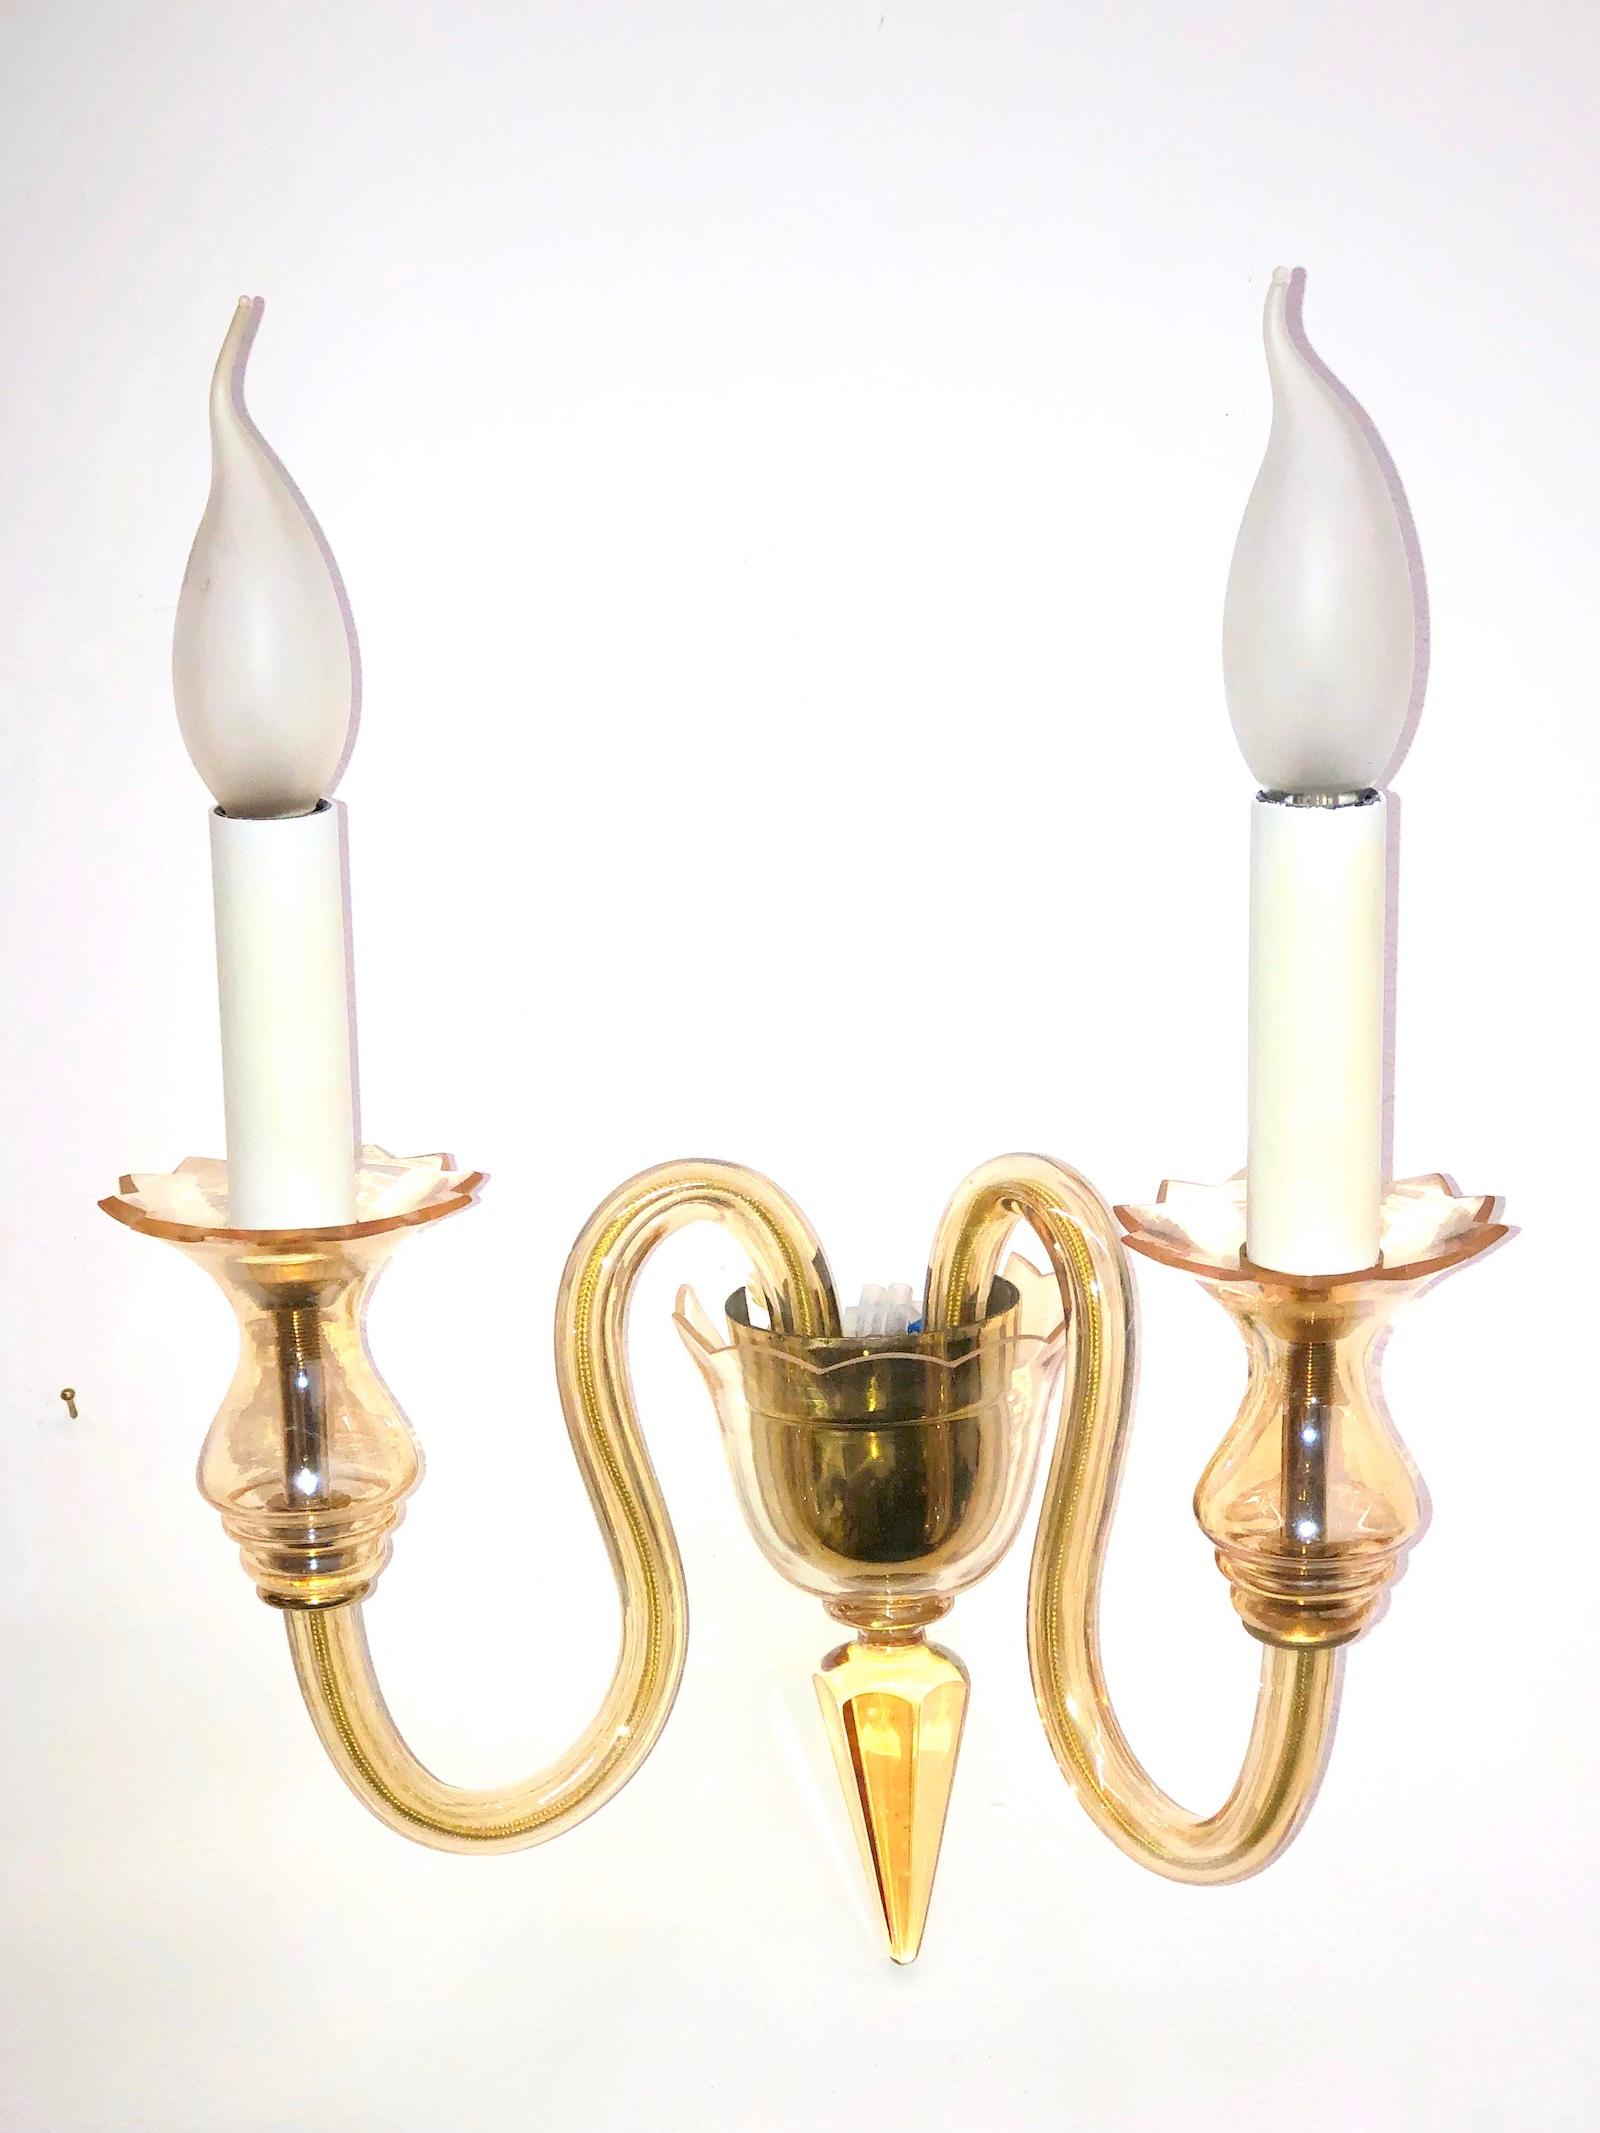 Italian Petite Murano Glass Sconce Wall Lamp Vintage, Italy, 1960s For Sale